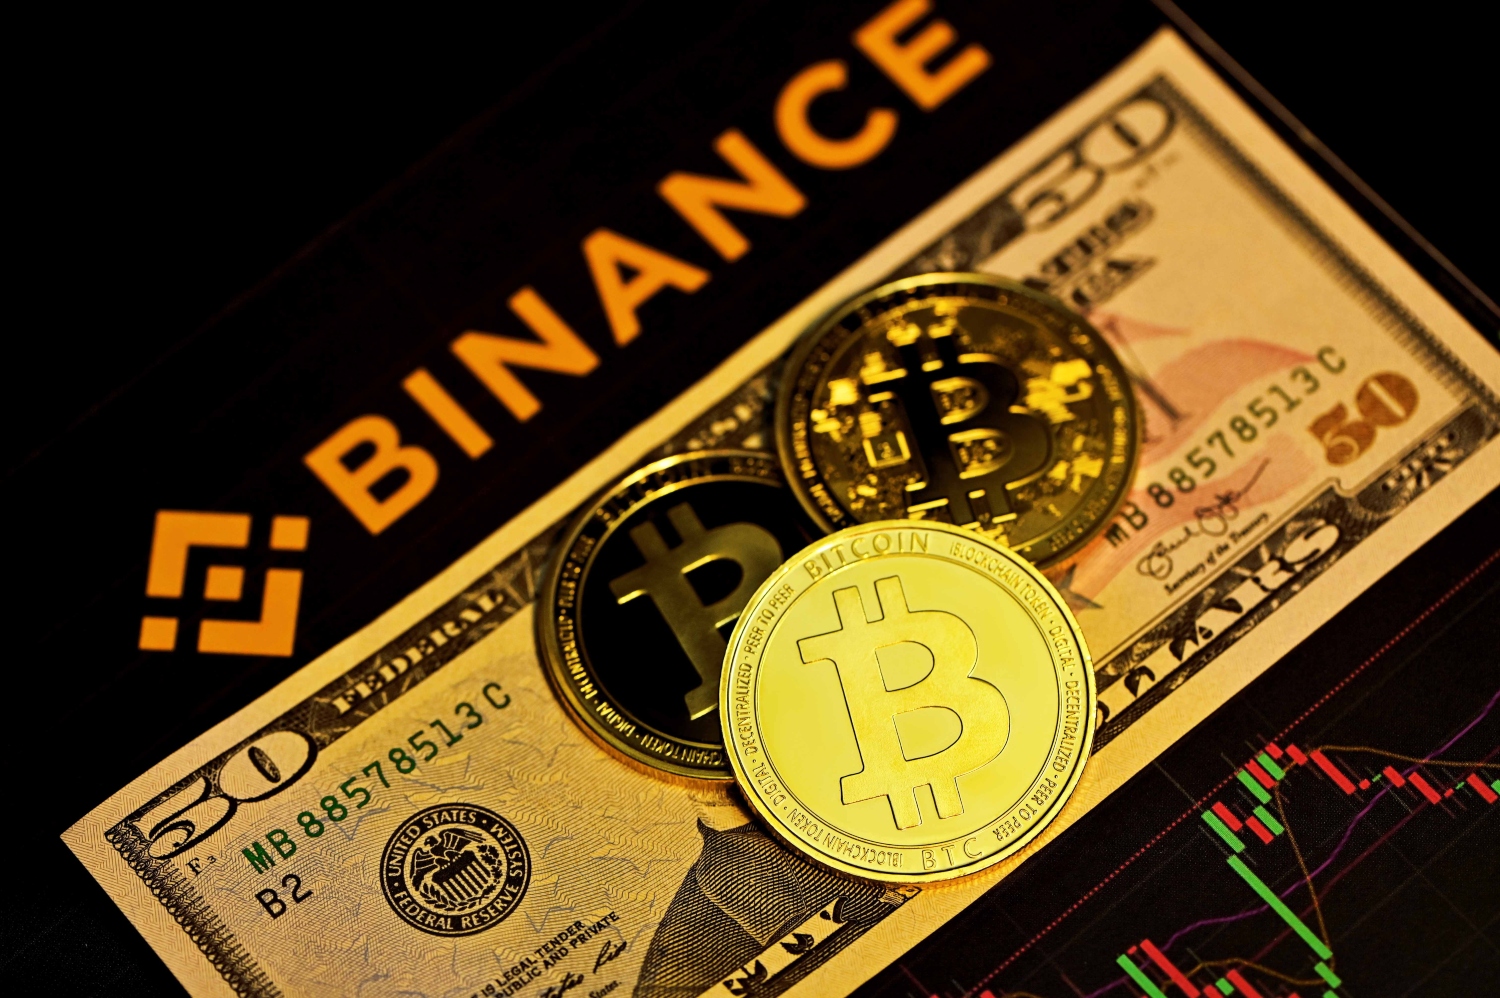 Binance.US Becomes the Largest On-Chain Staking Provider in the U.S.